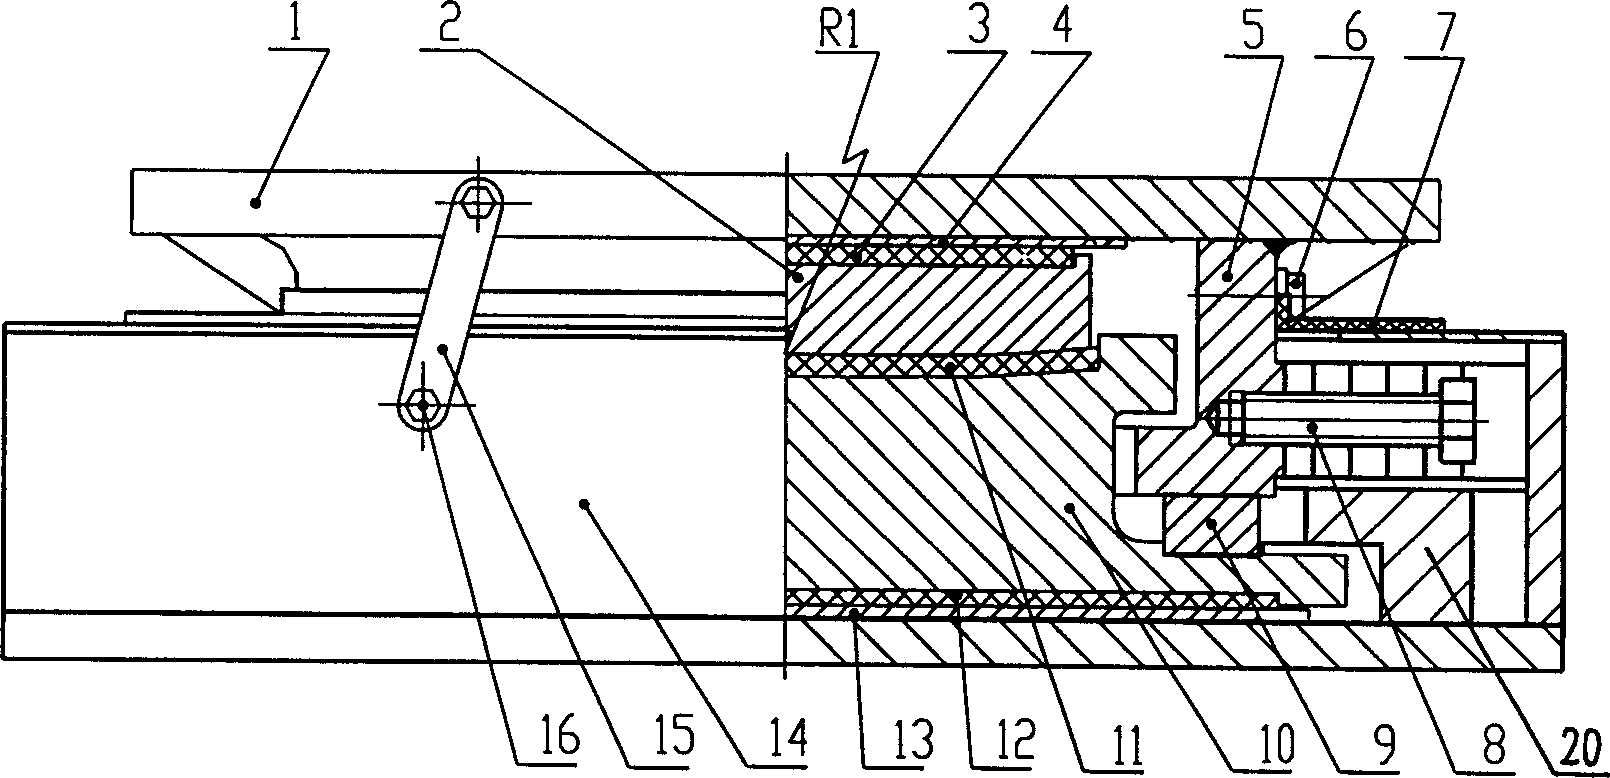 Hyperbolic shaped steel bearing for engineering structure